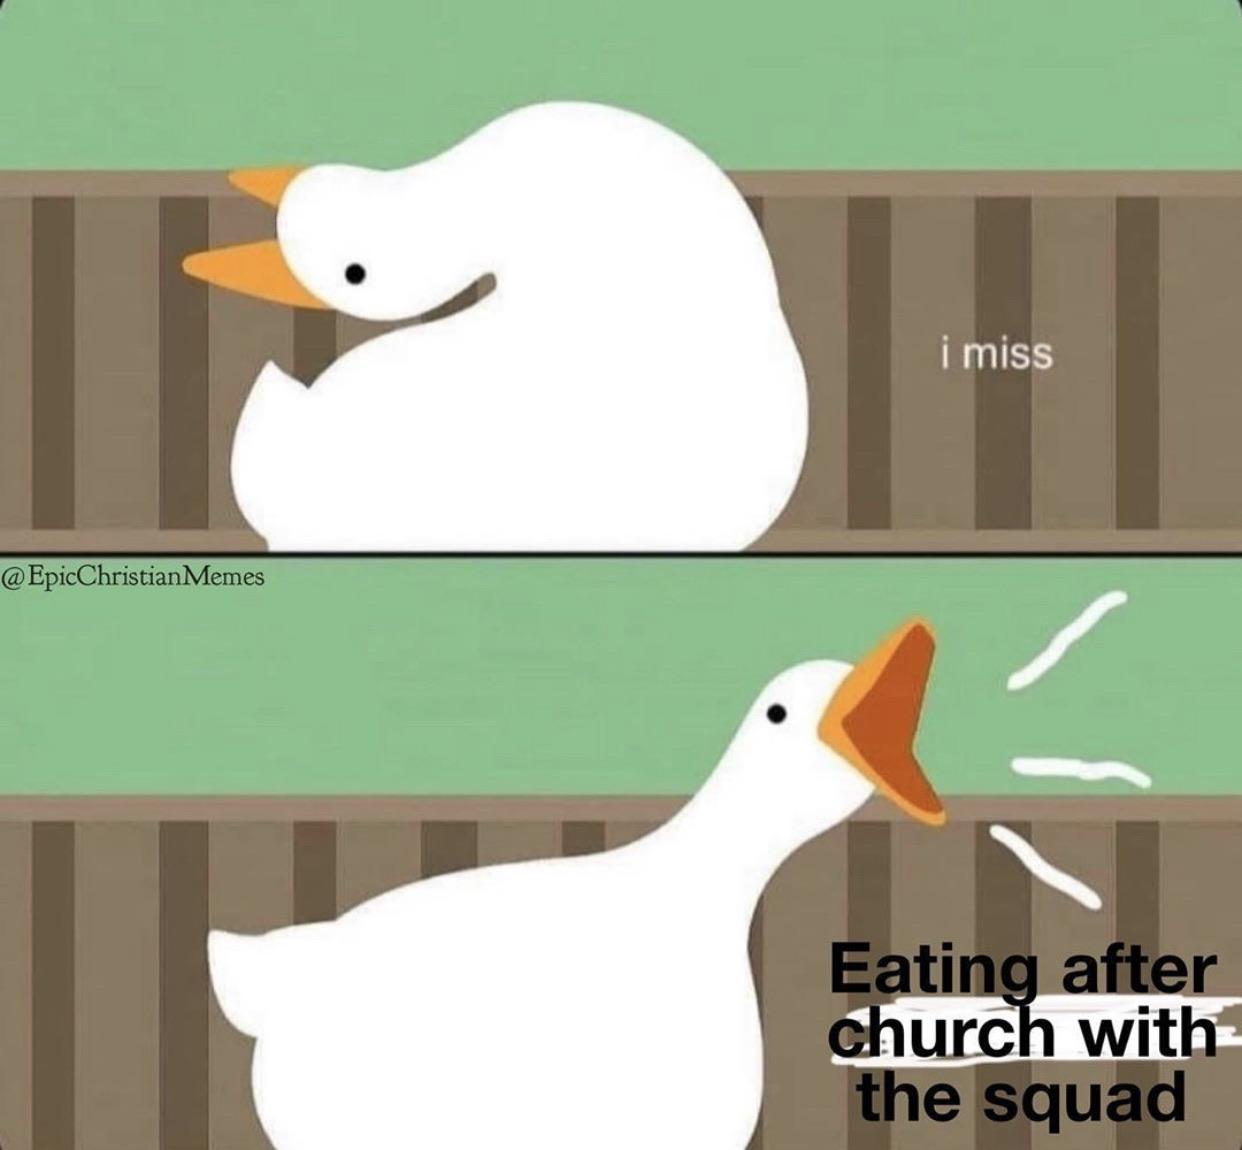 Christian, Picture Christian Memes Christian, Picture text: i miss @EpicChristianMemes church with' e squad 